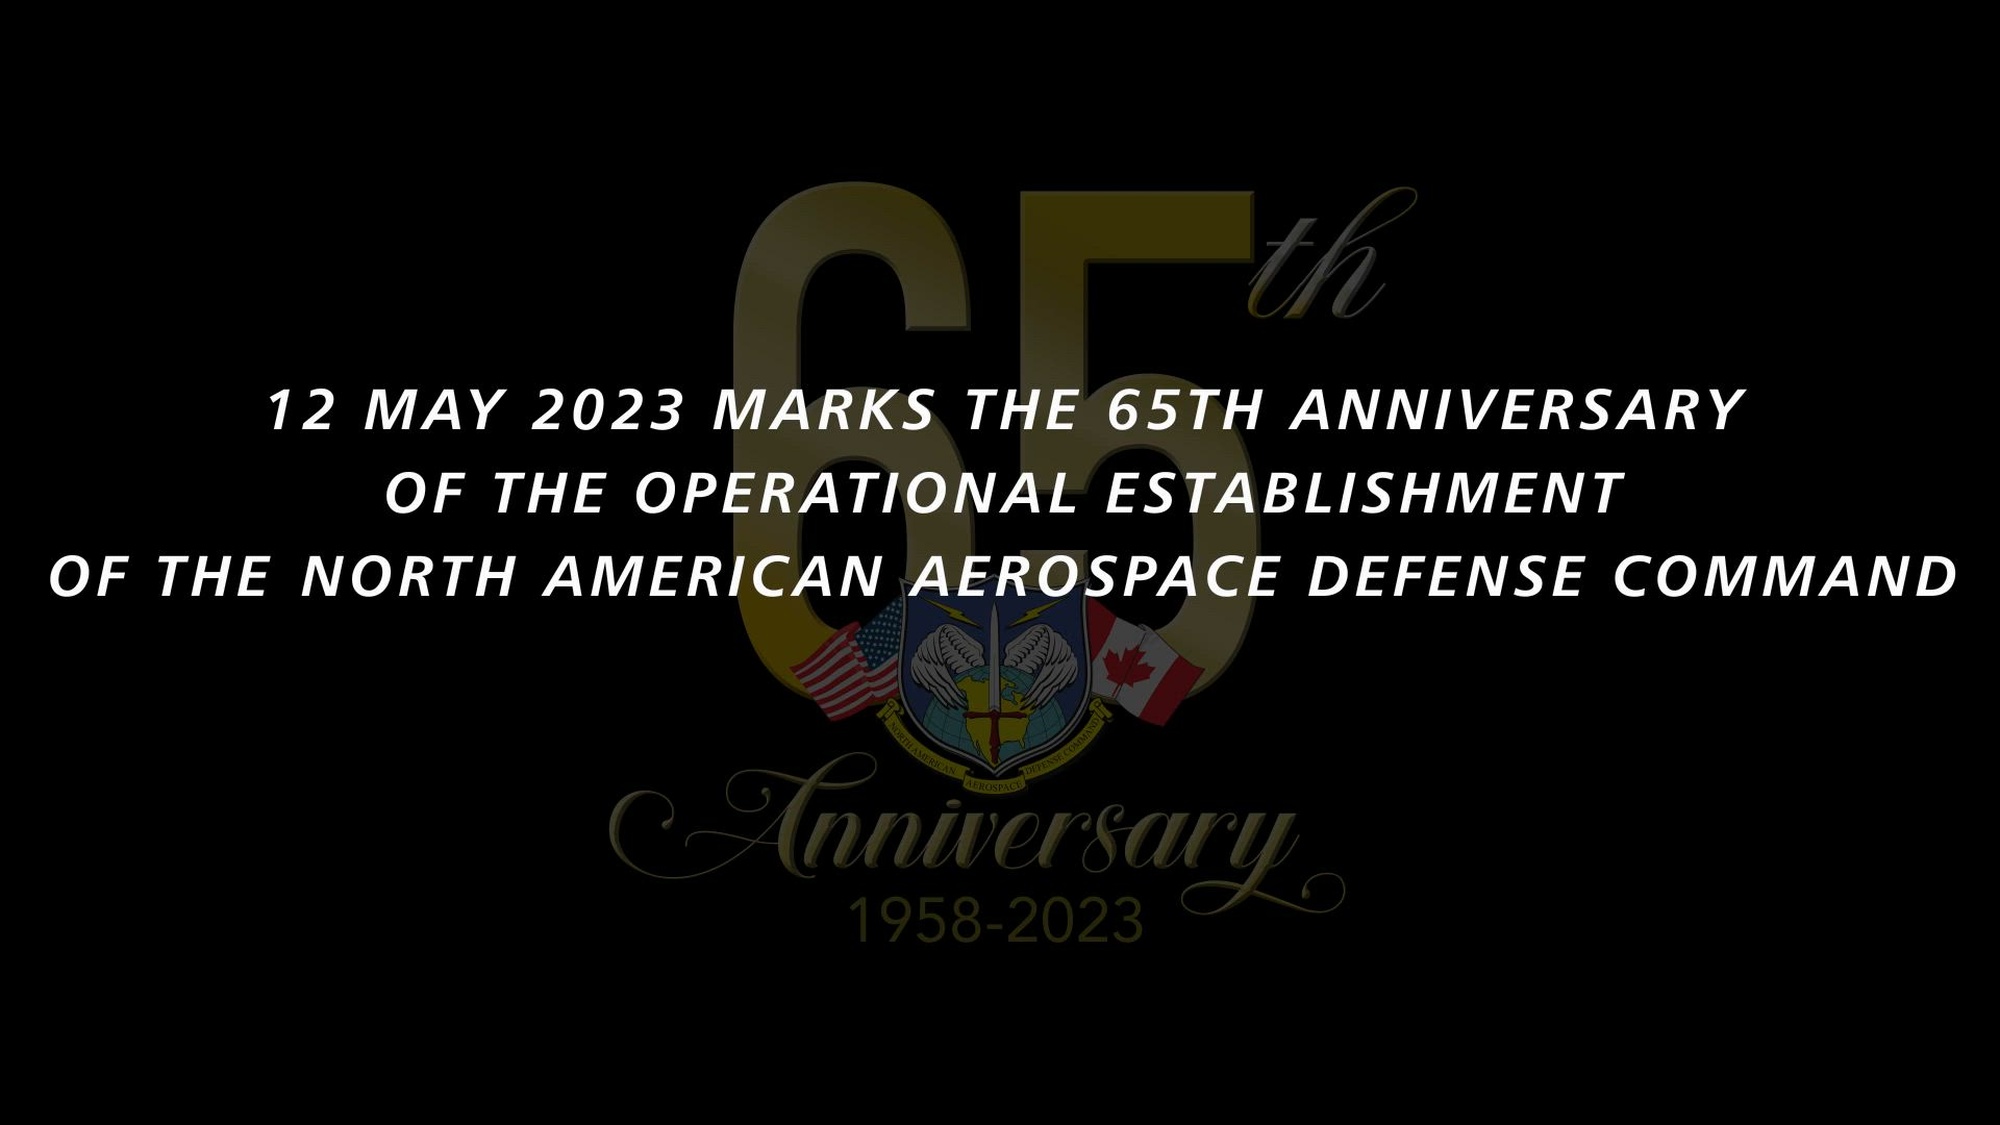 Video celebrating NORAD's 65th Anniversary on May 12, 2023.